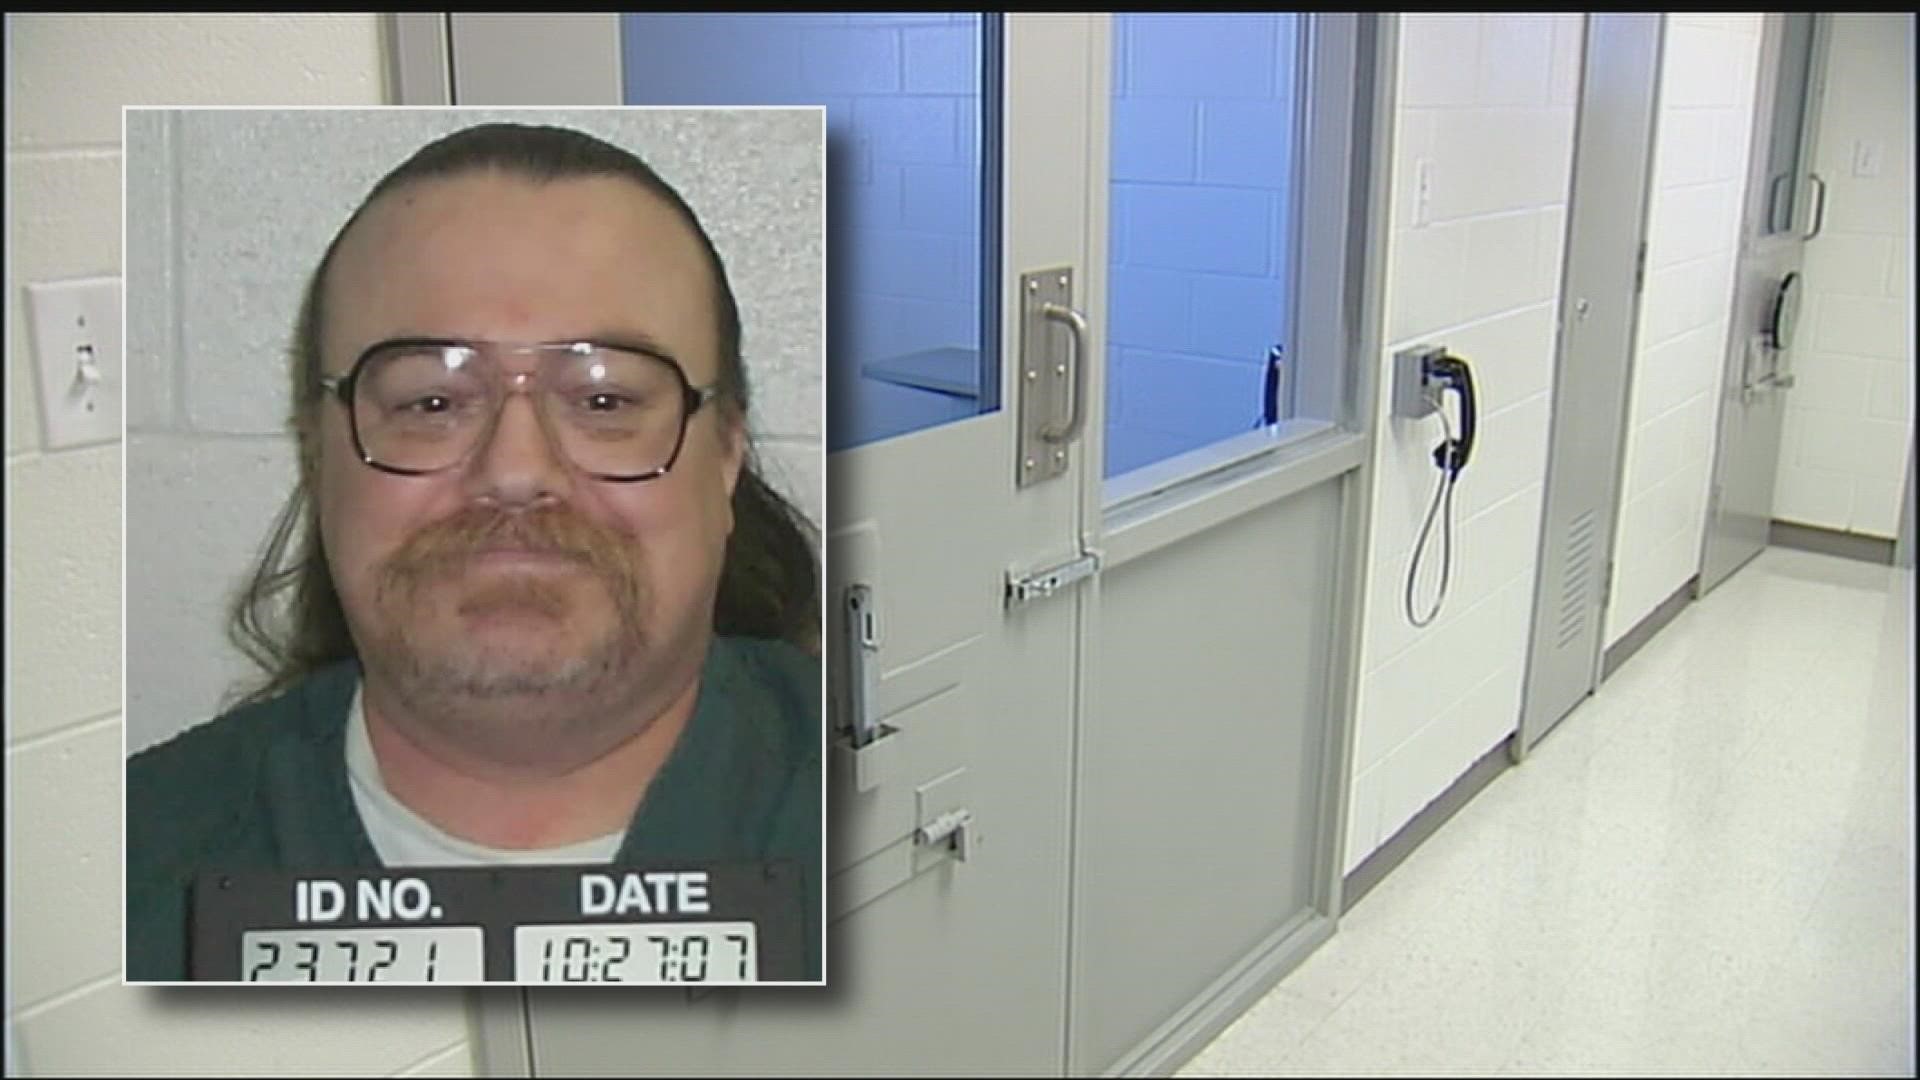 The state's death warrant, issued last week, sets Gerald Pizzuto Jr.'s execution by lethal injection on Dec. 15. He is asking a federal court to block the execution.